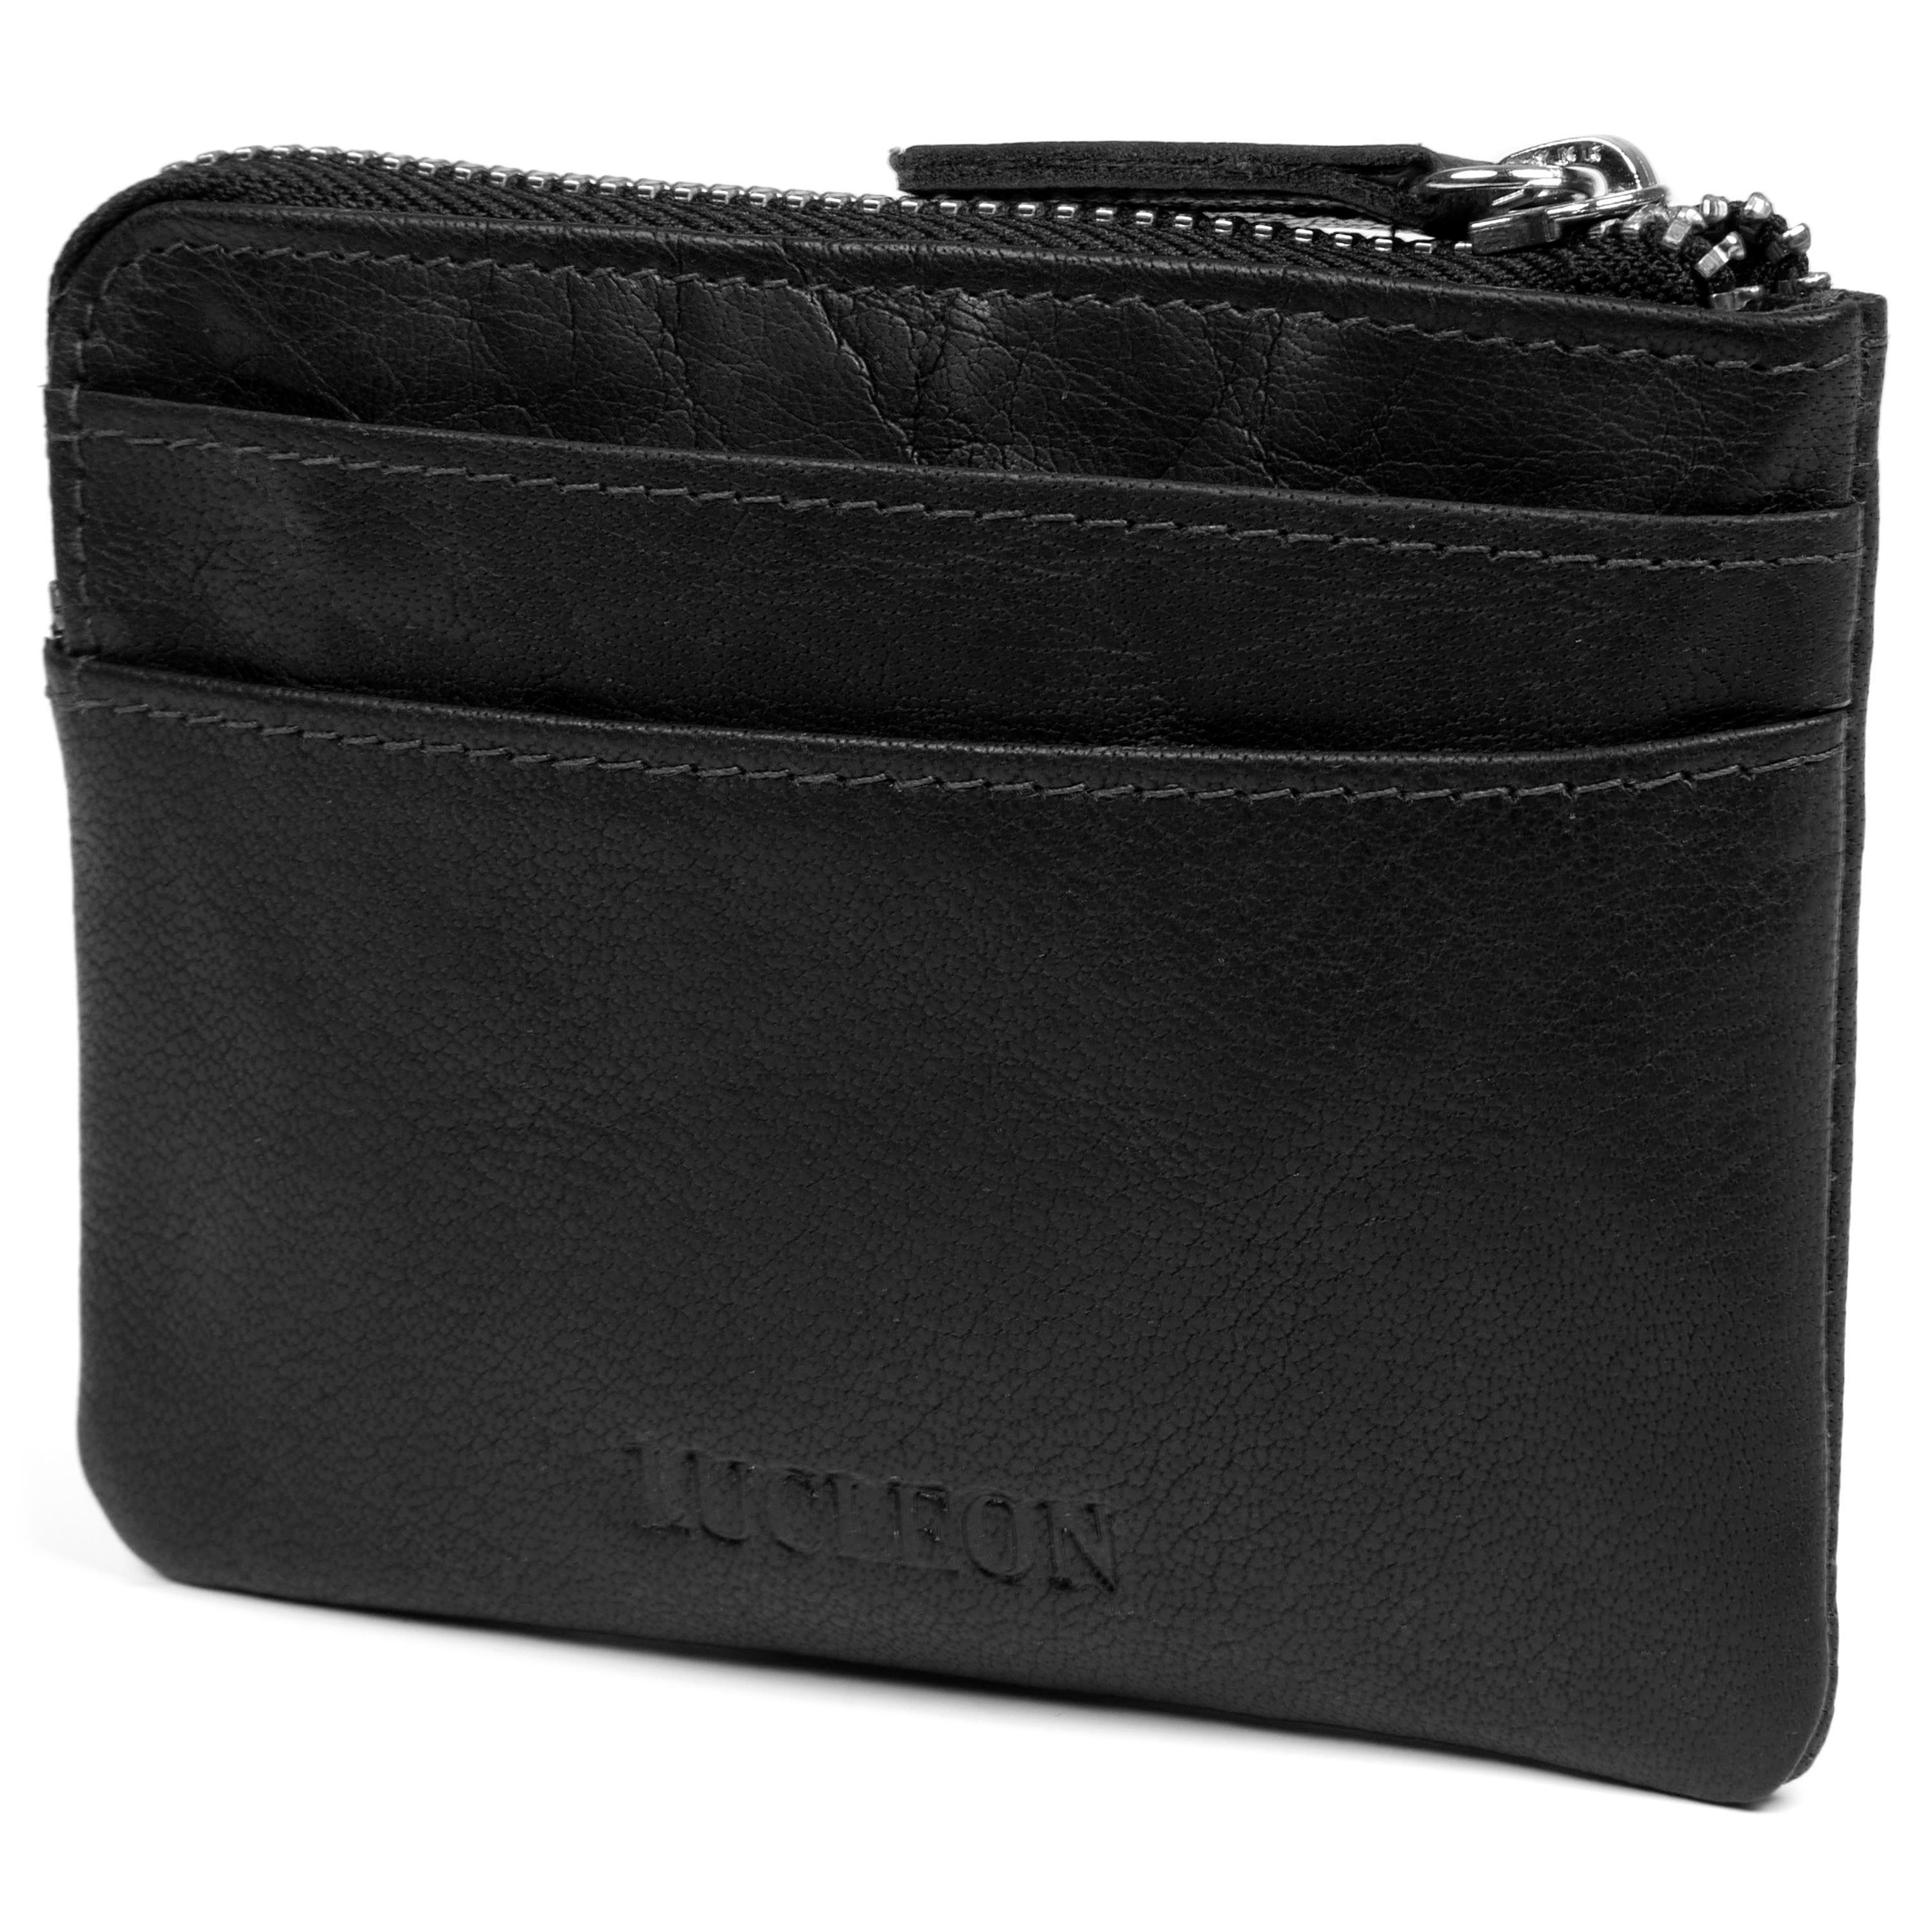 Montreal | Zipped Black RFID Leather Pouch